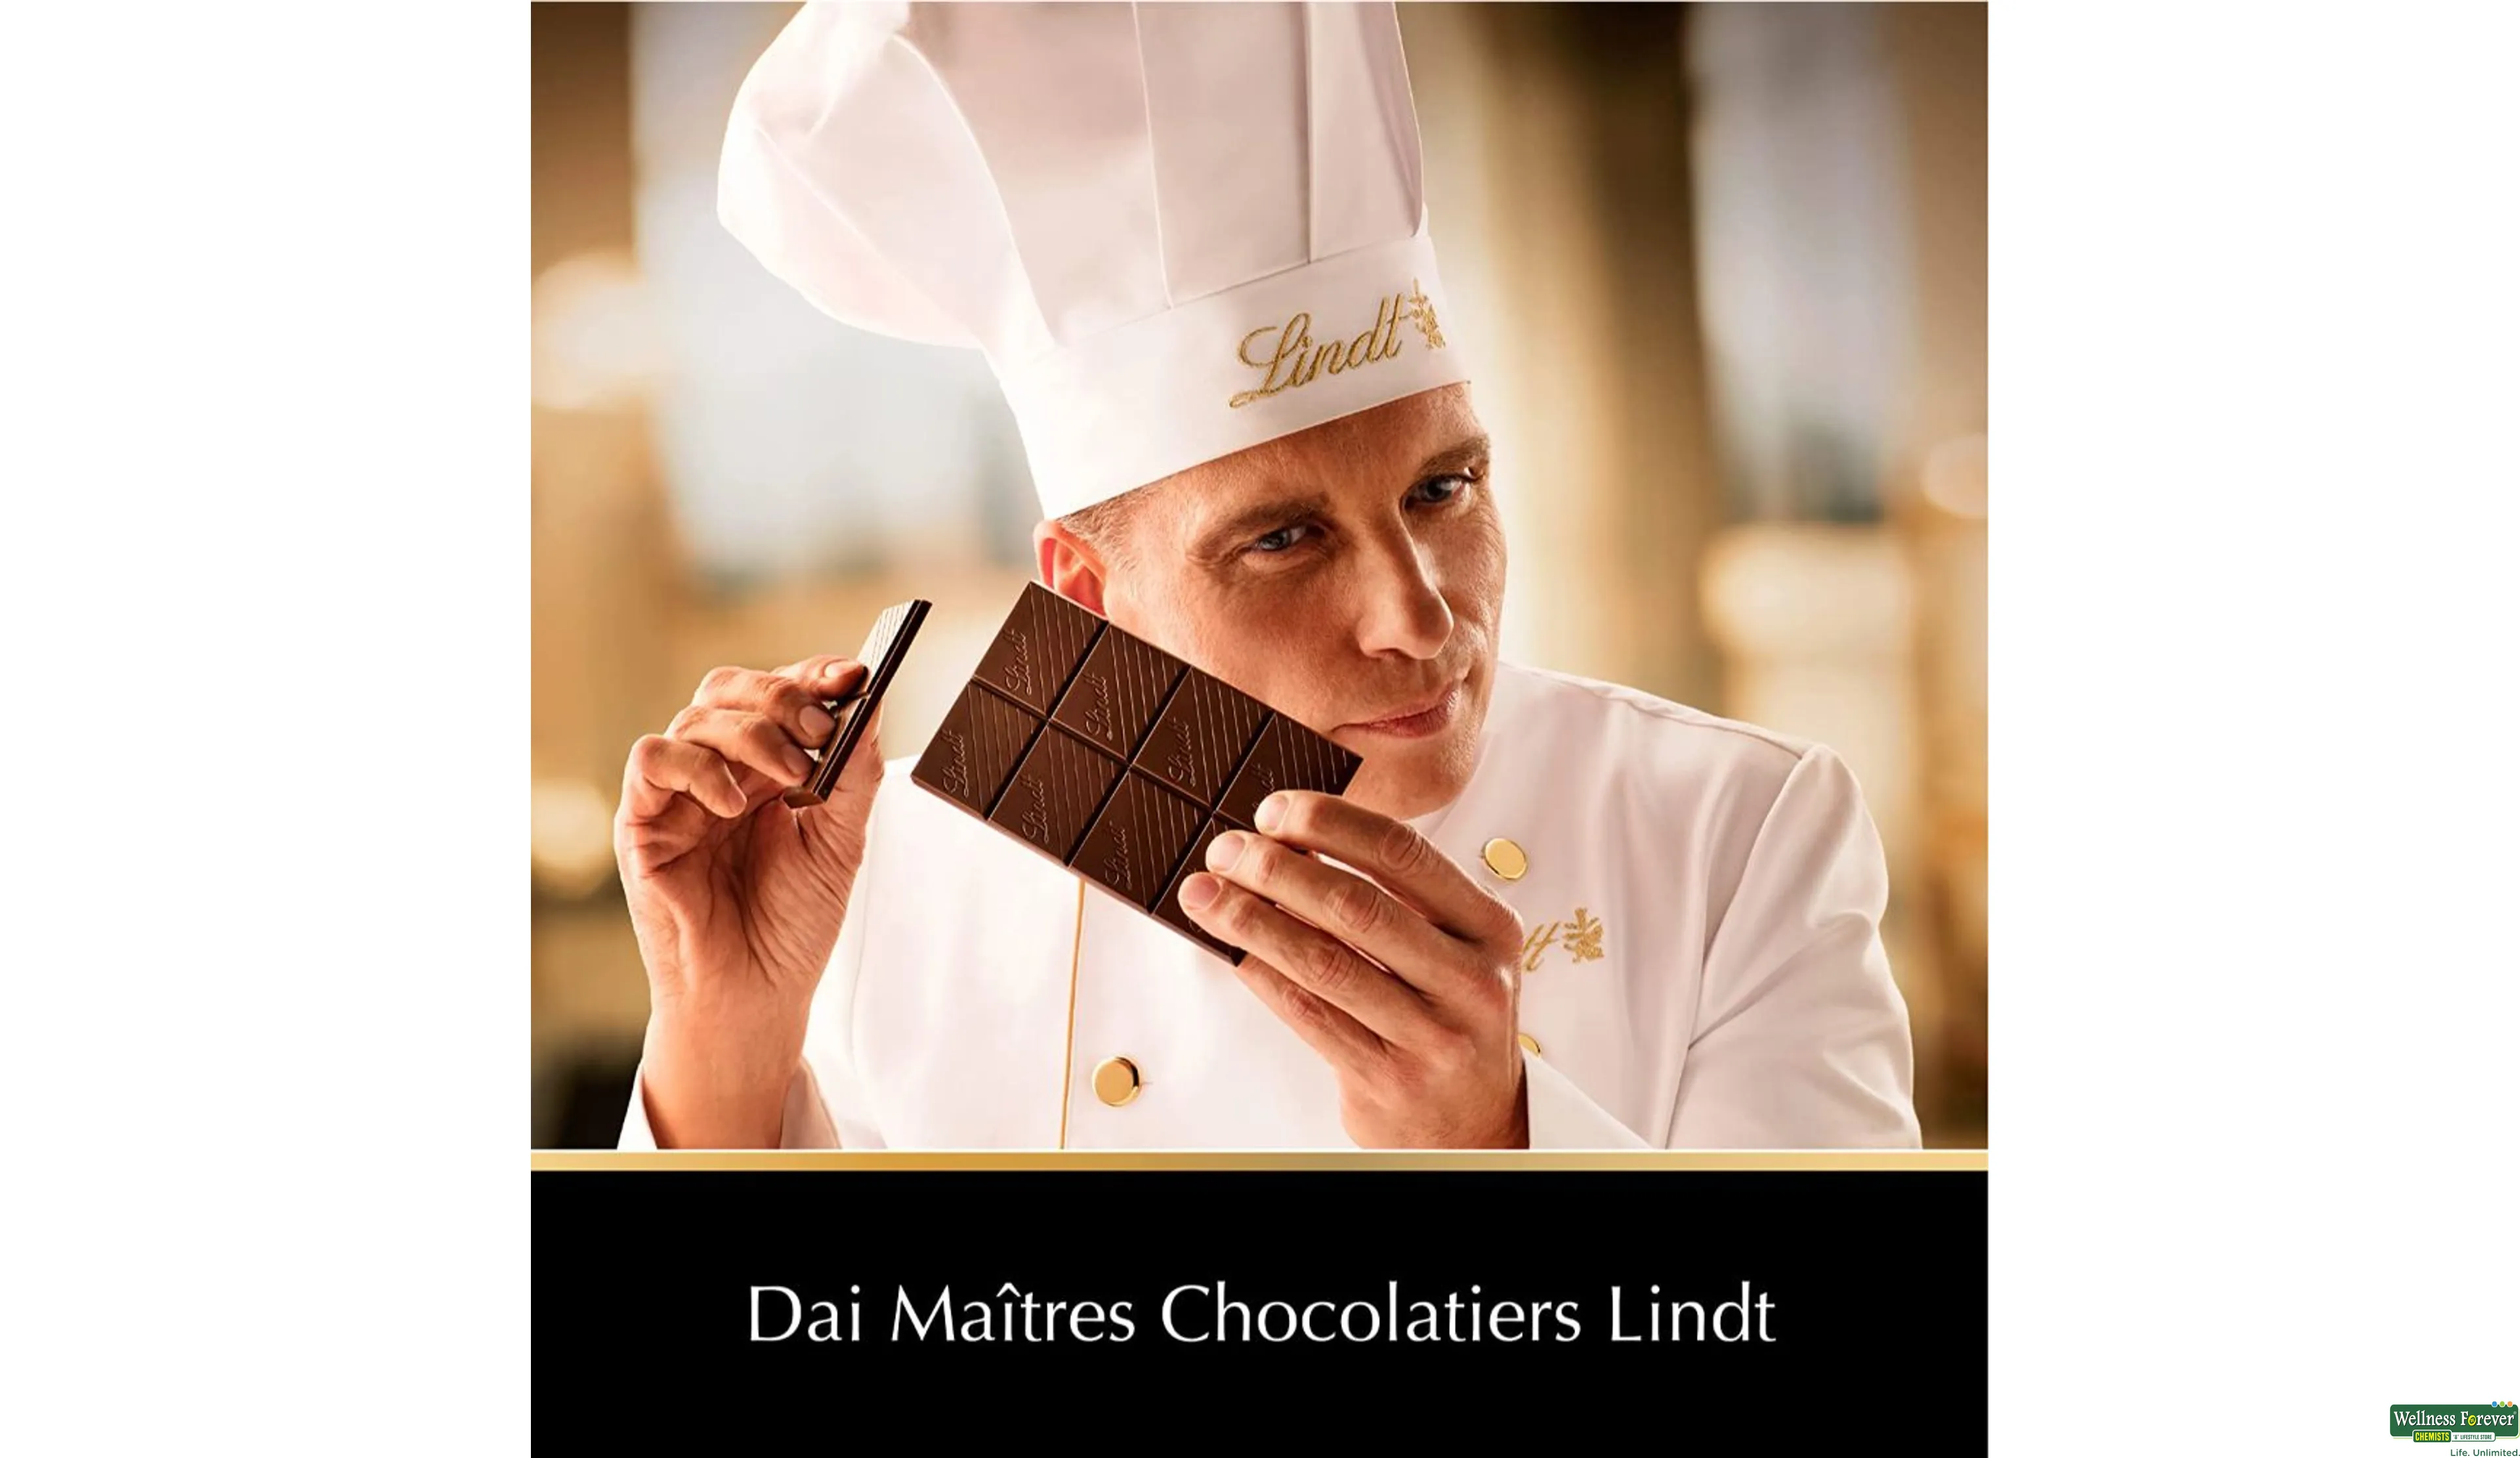 LINDT CHOC EXCE COCOA DARK 90% 100GM- 4, 100GM, 